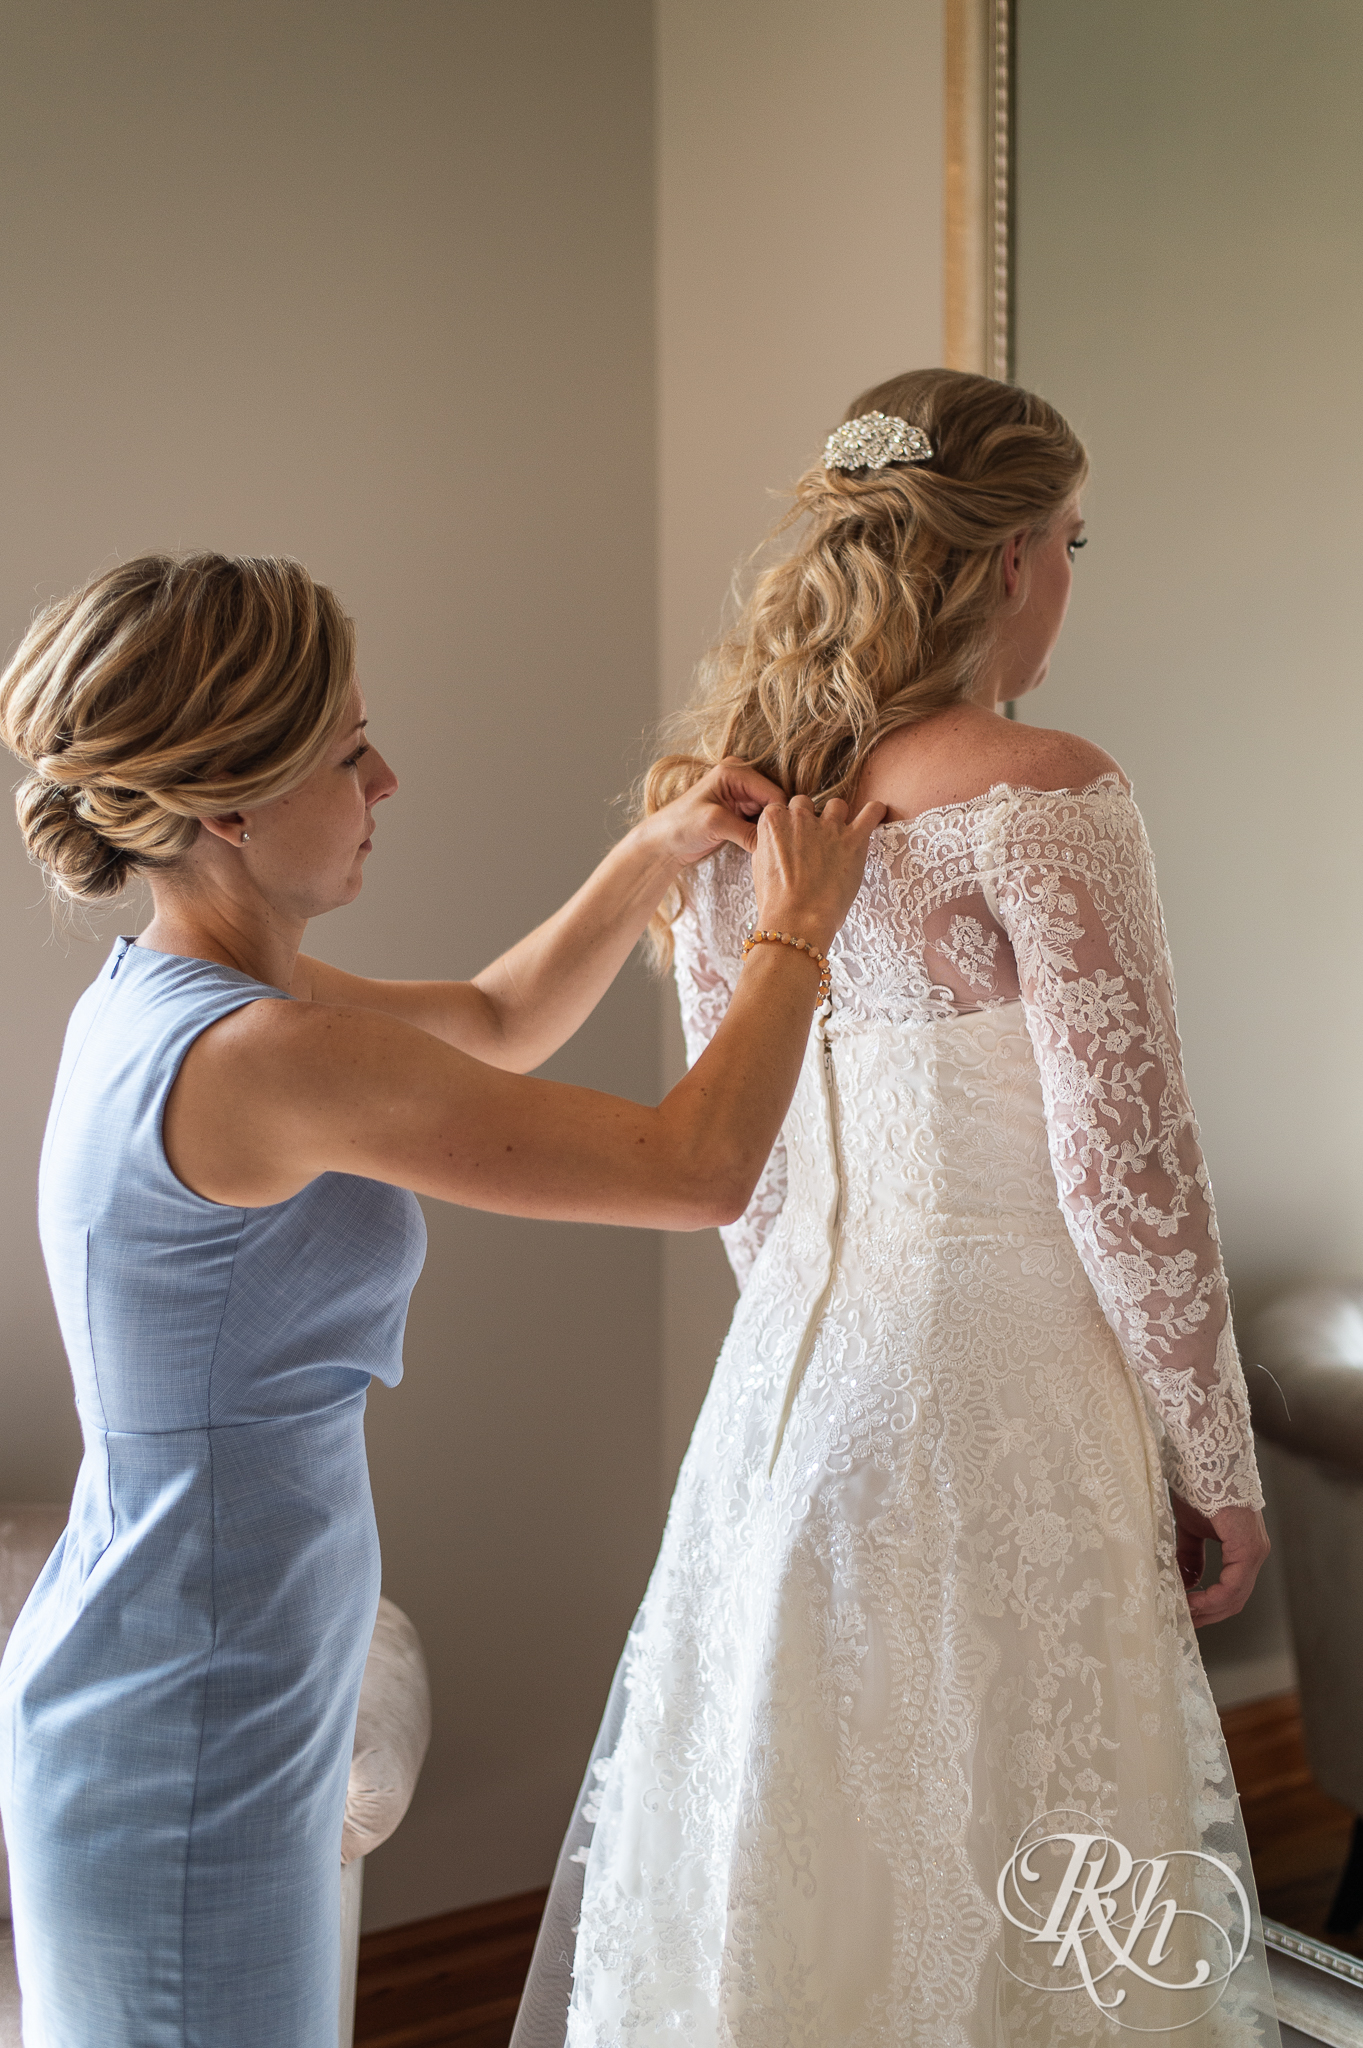 Bride getting dress put on before wedding at Weddings at the Broz in New Prague, Minnesota.